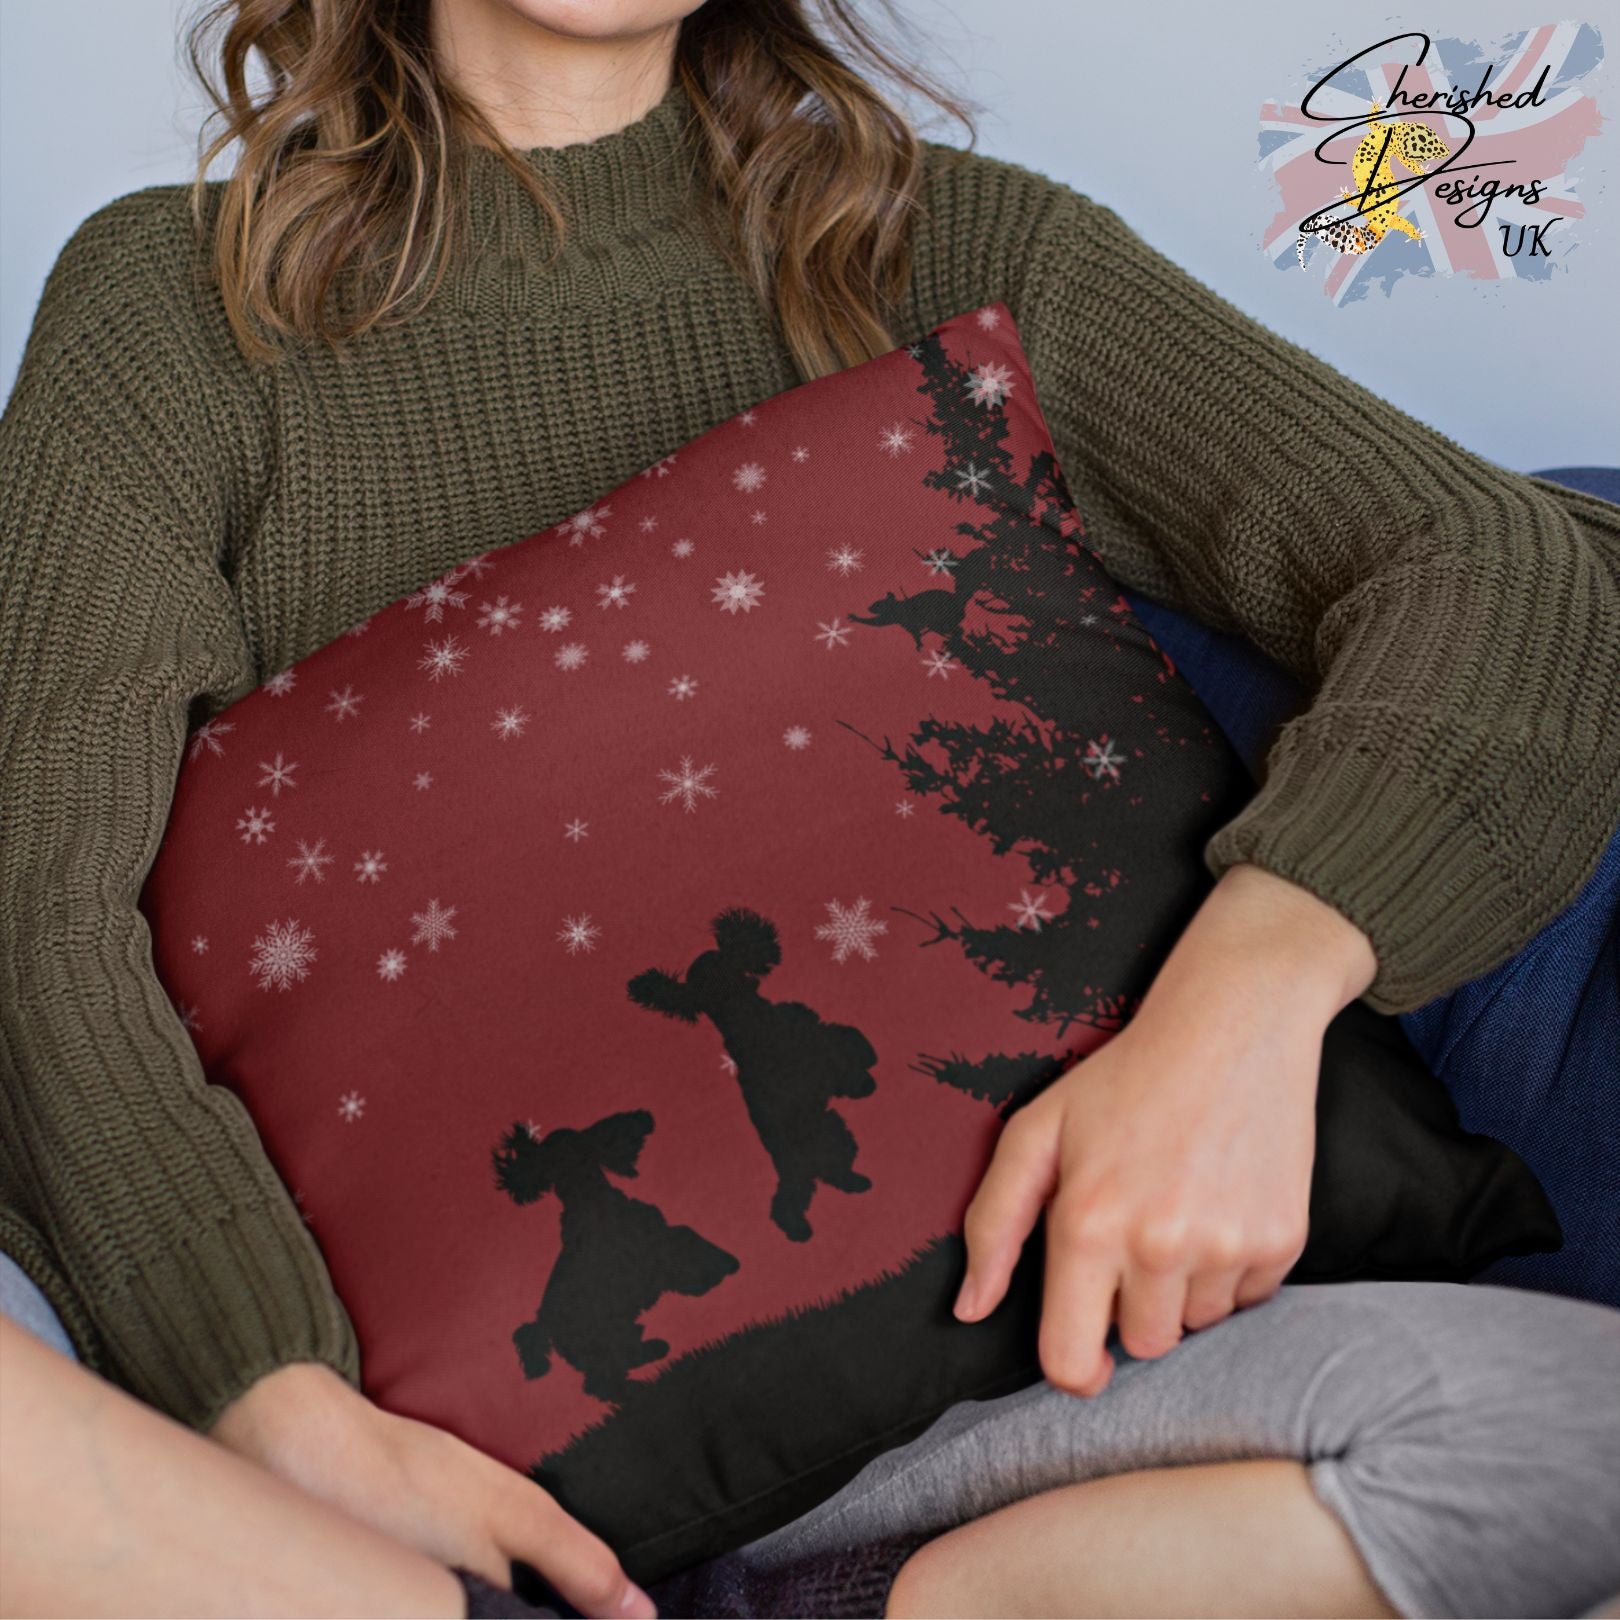 Red Christmas cushion covers